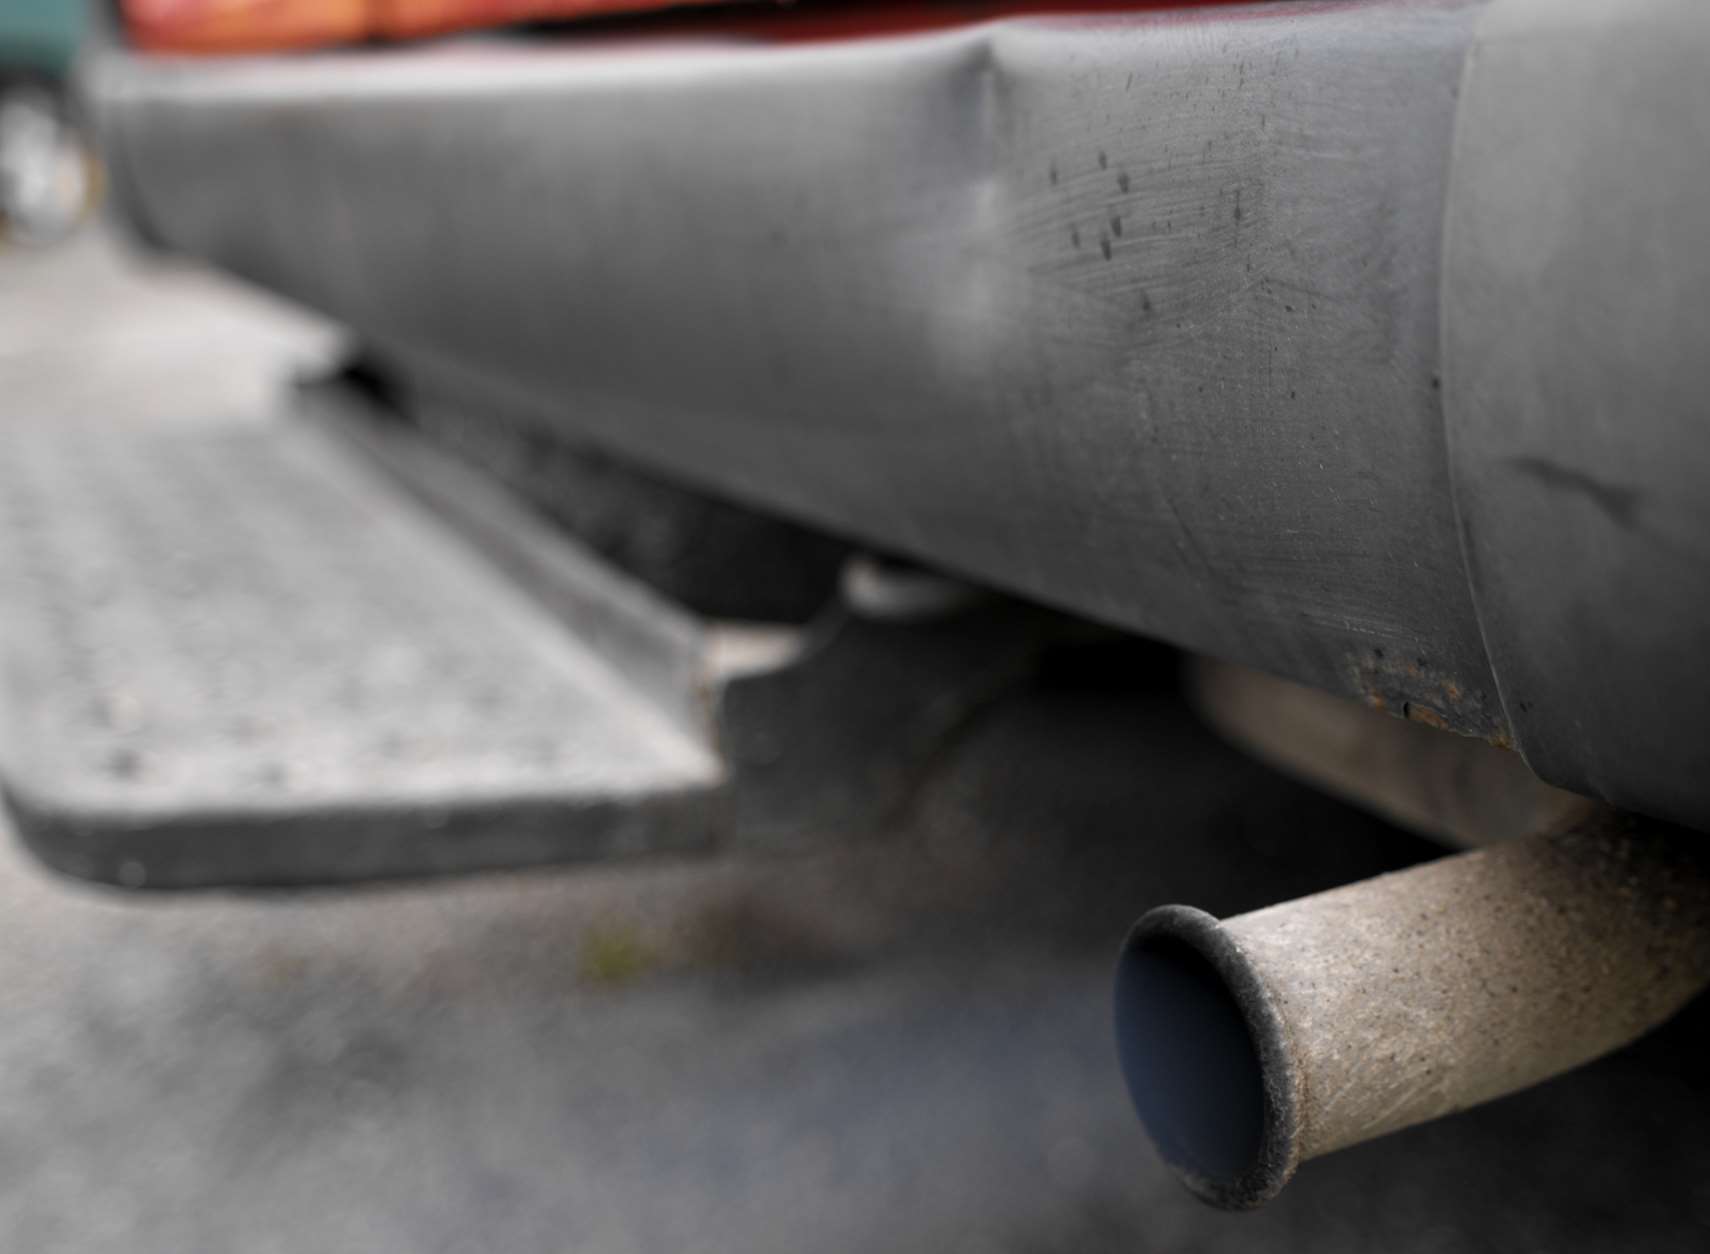 A car exhaust pumping out of fumes. Stock image